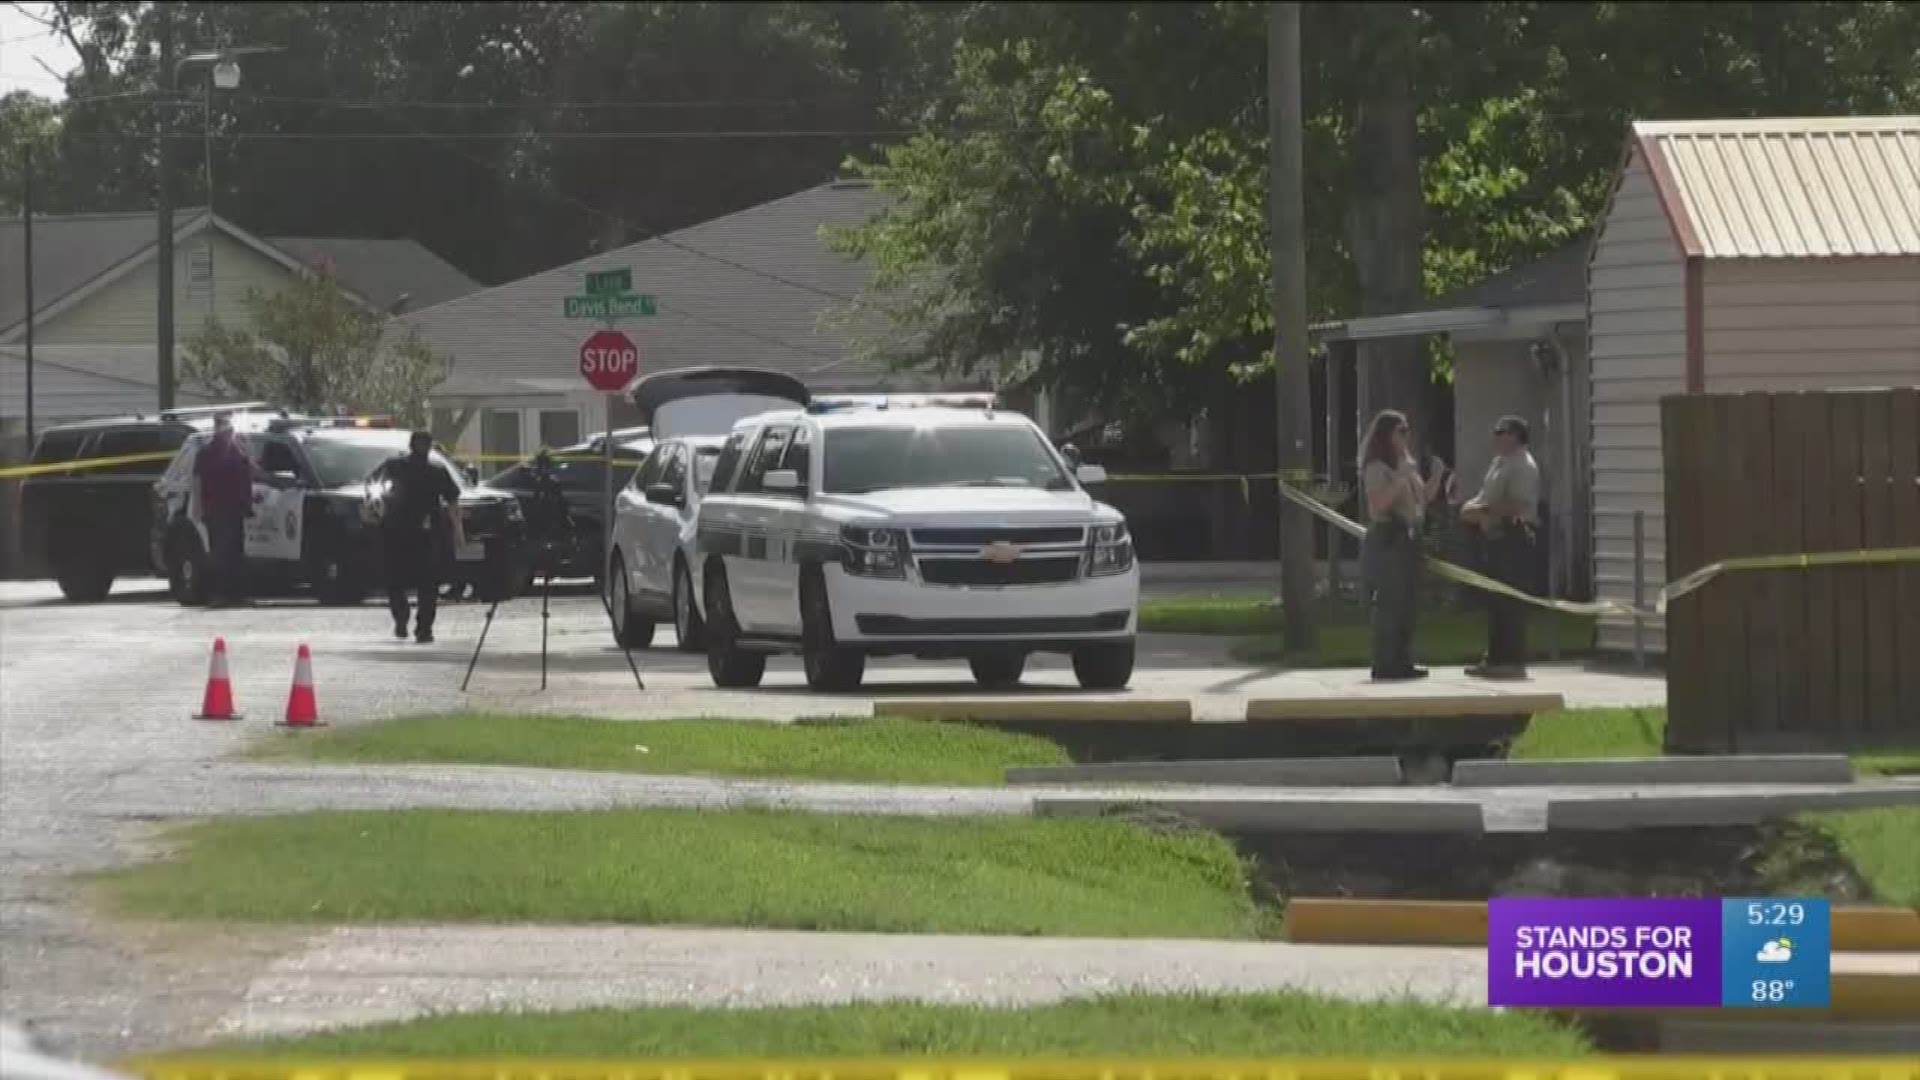 Police surrounded an area near a church in Alvin where officers say there's been a shooting at a church.